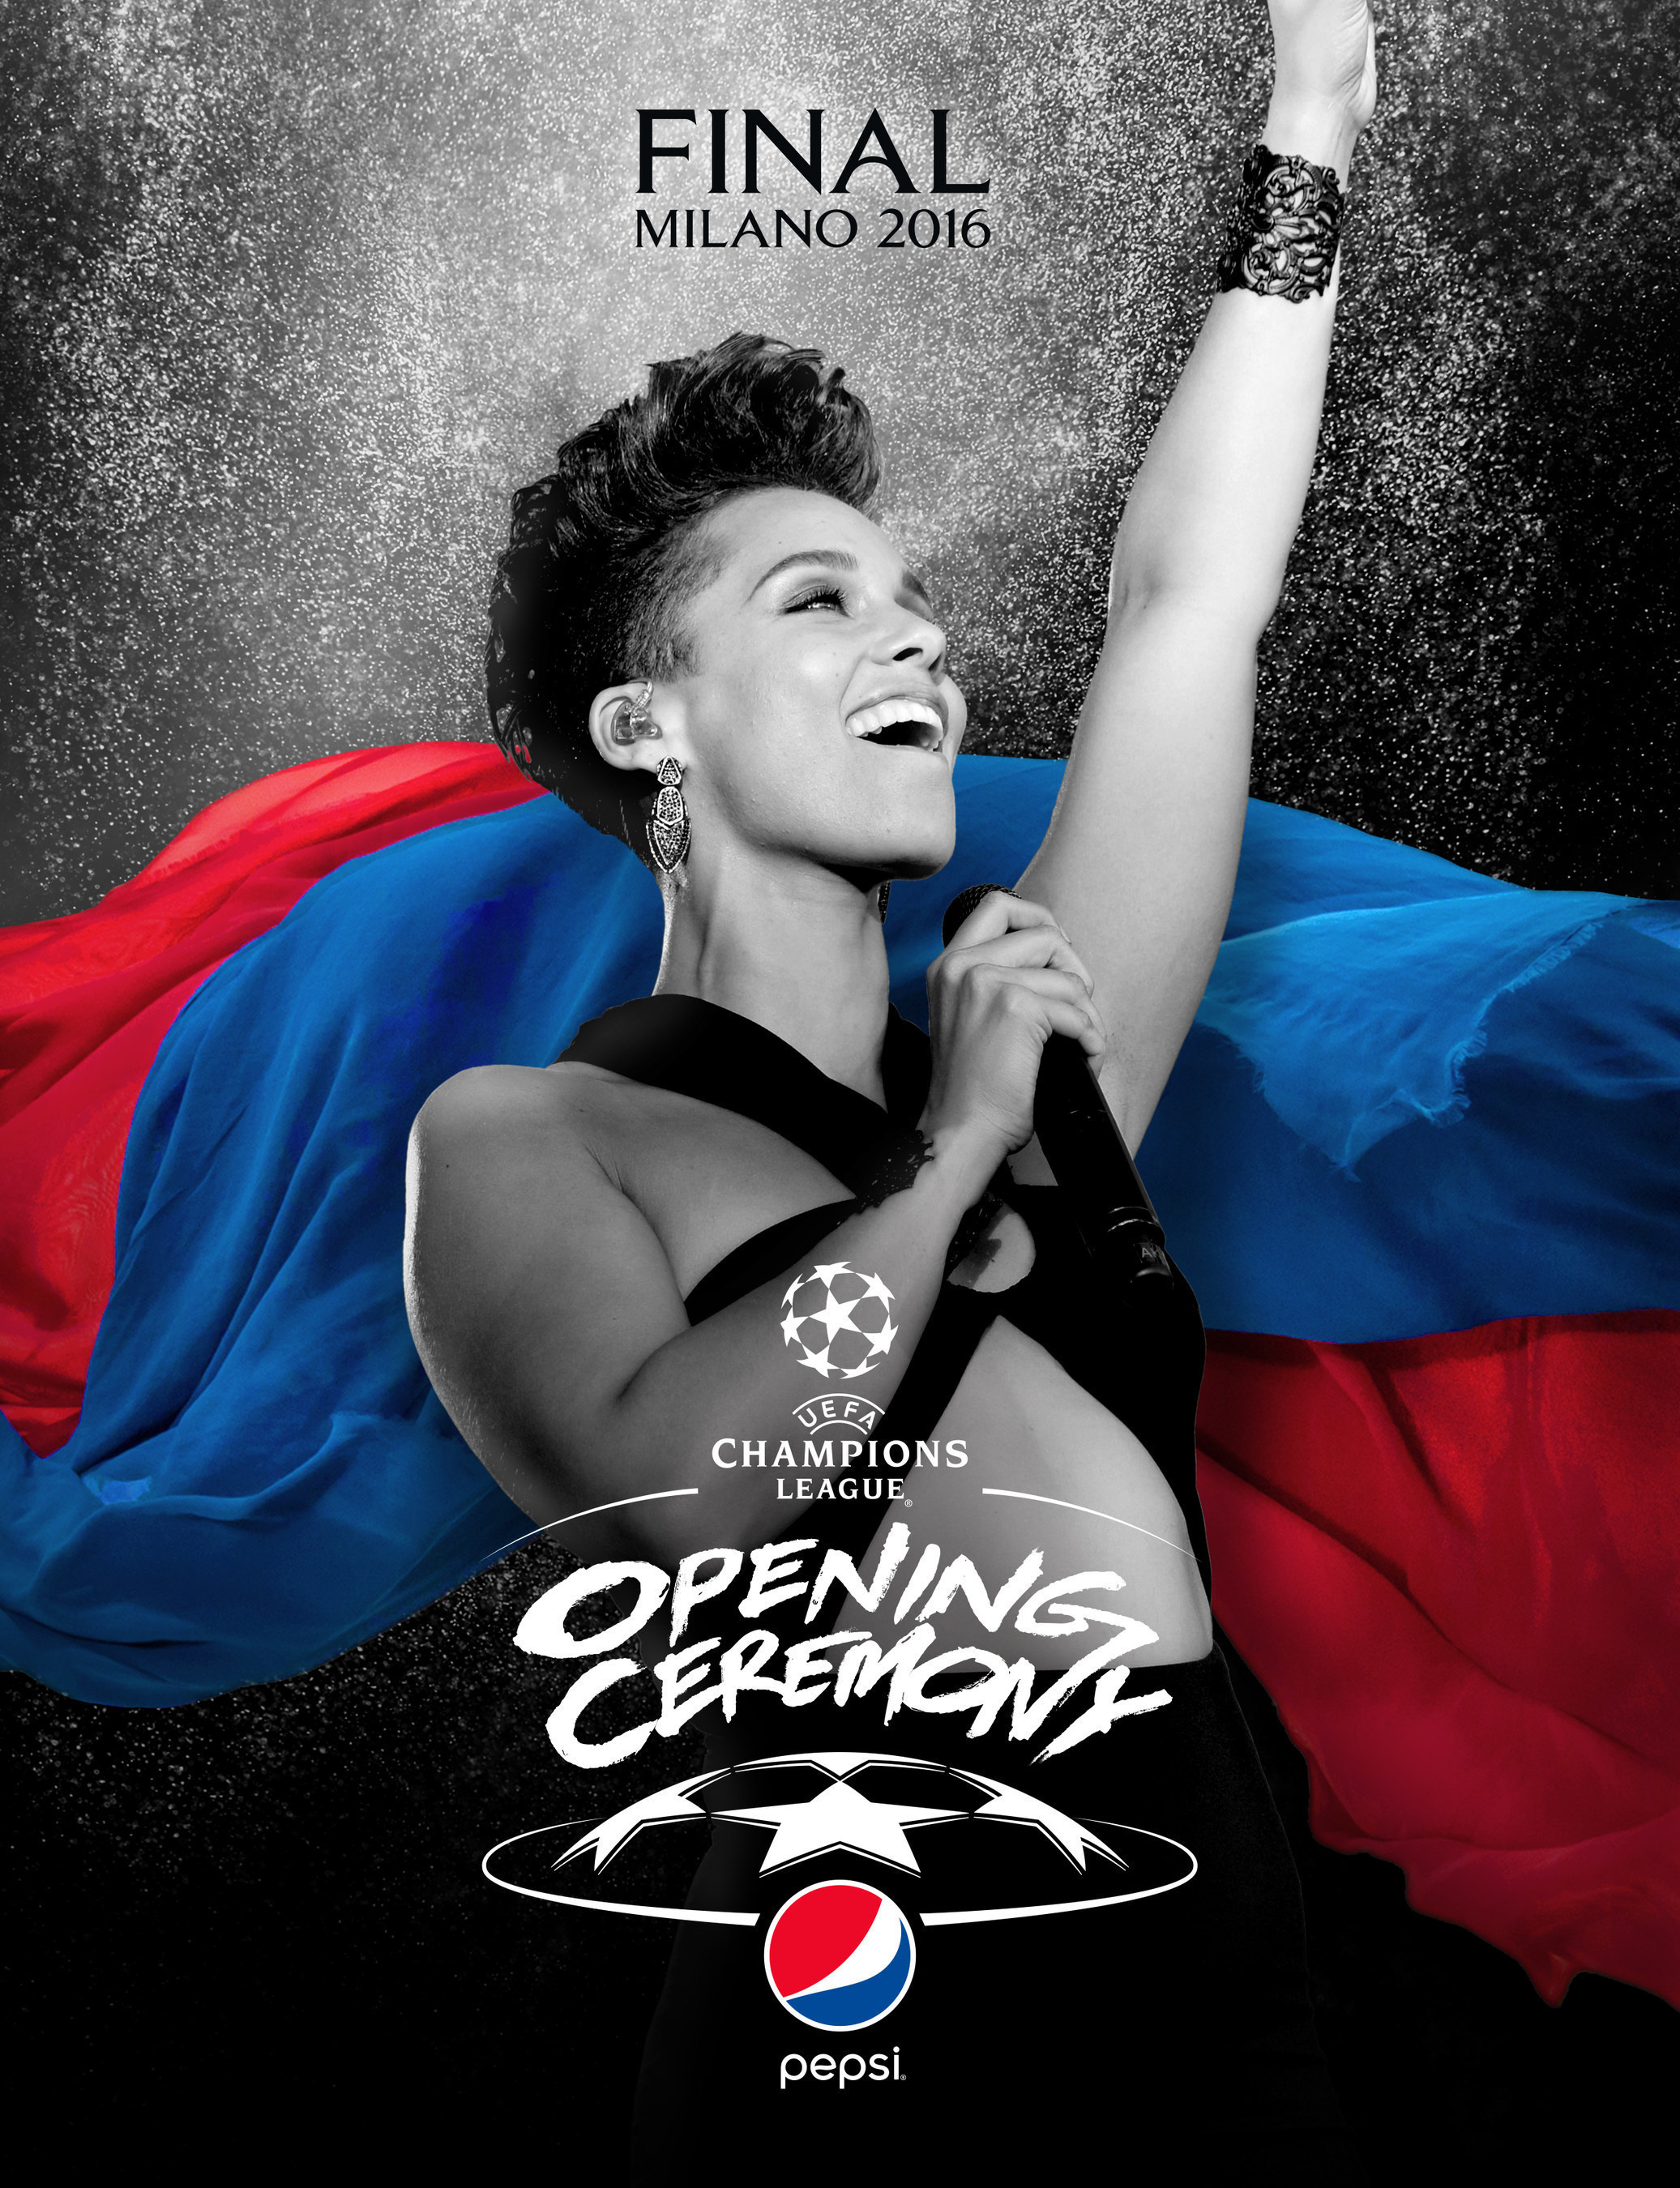 Alicia Keys to perform at the first-ever "UEFA Champions League Final Opening Ceremony presented by Pepsi"